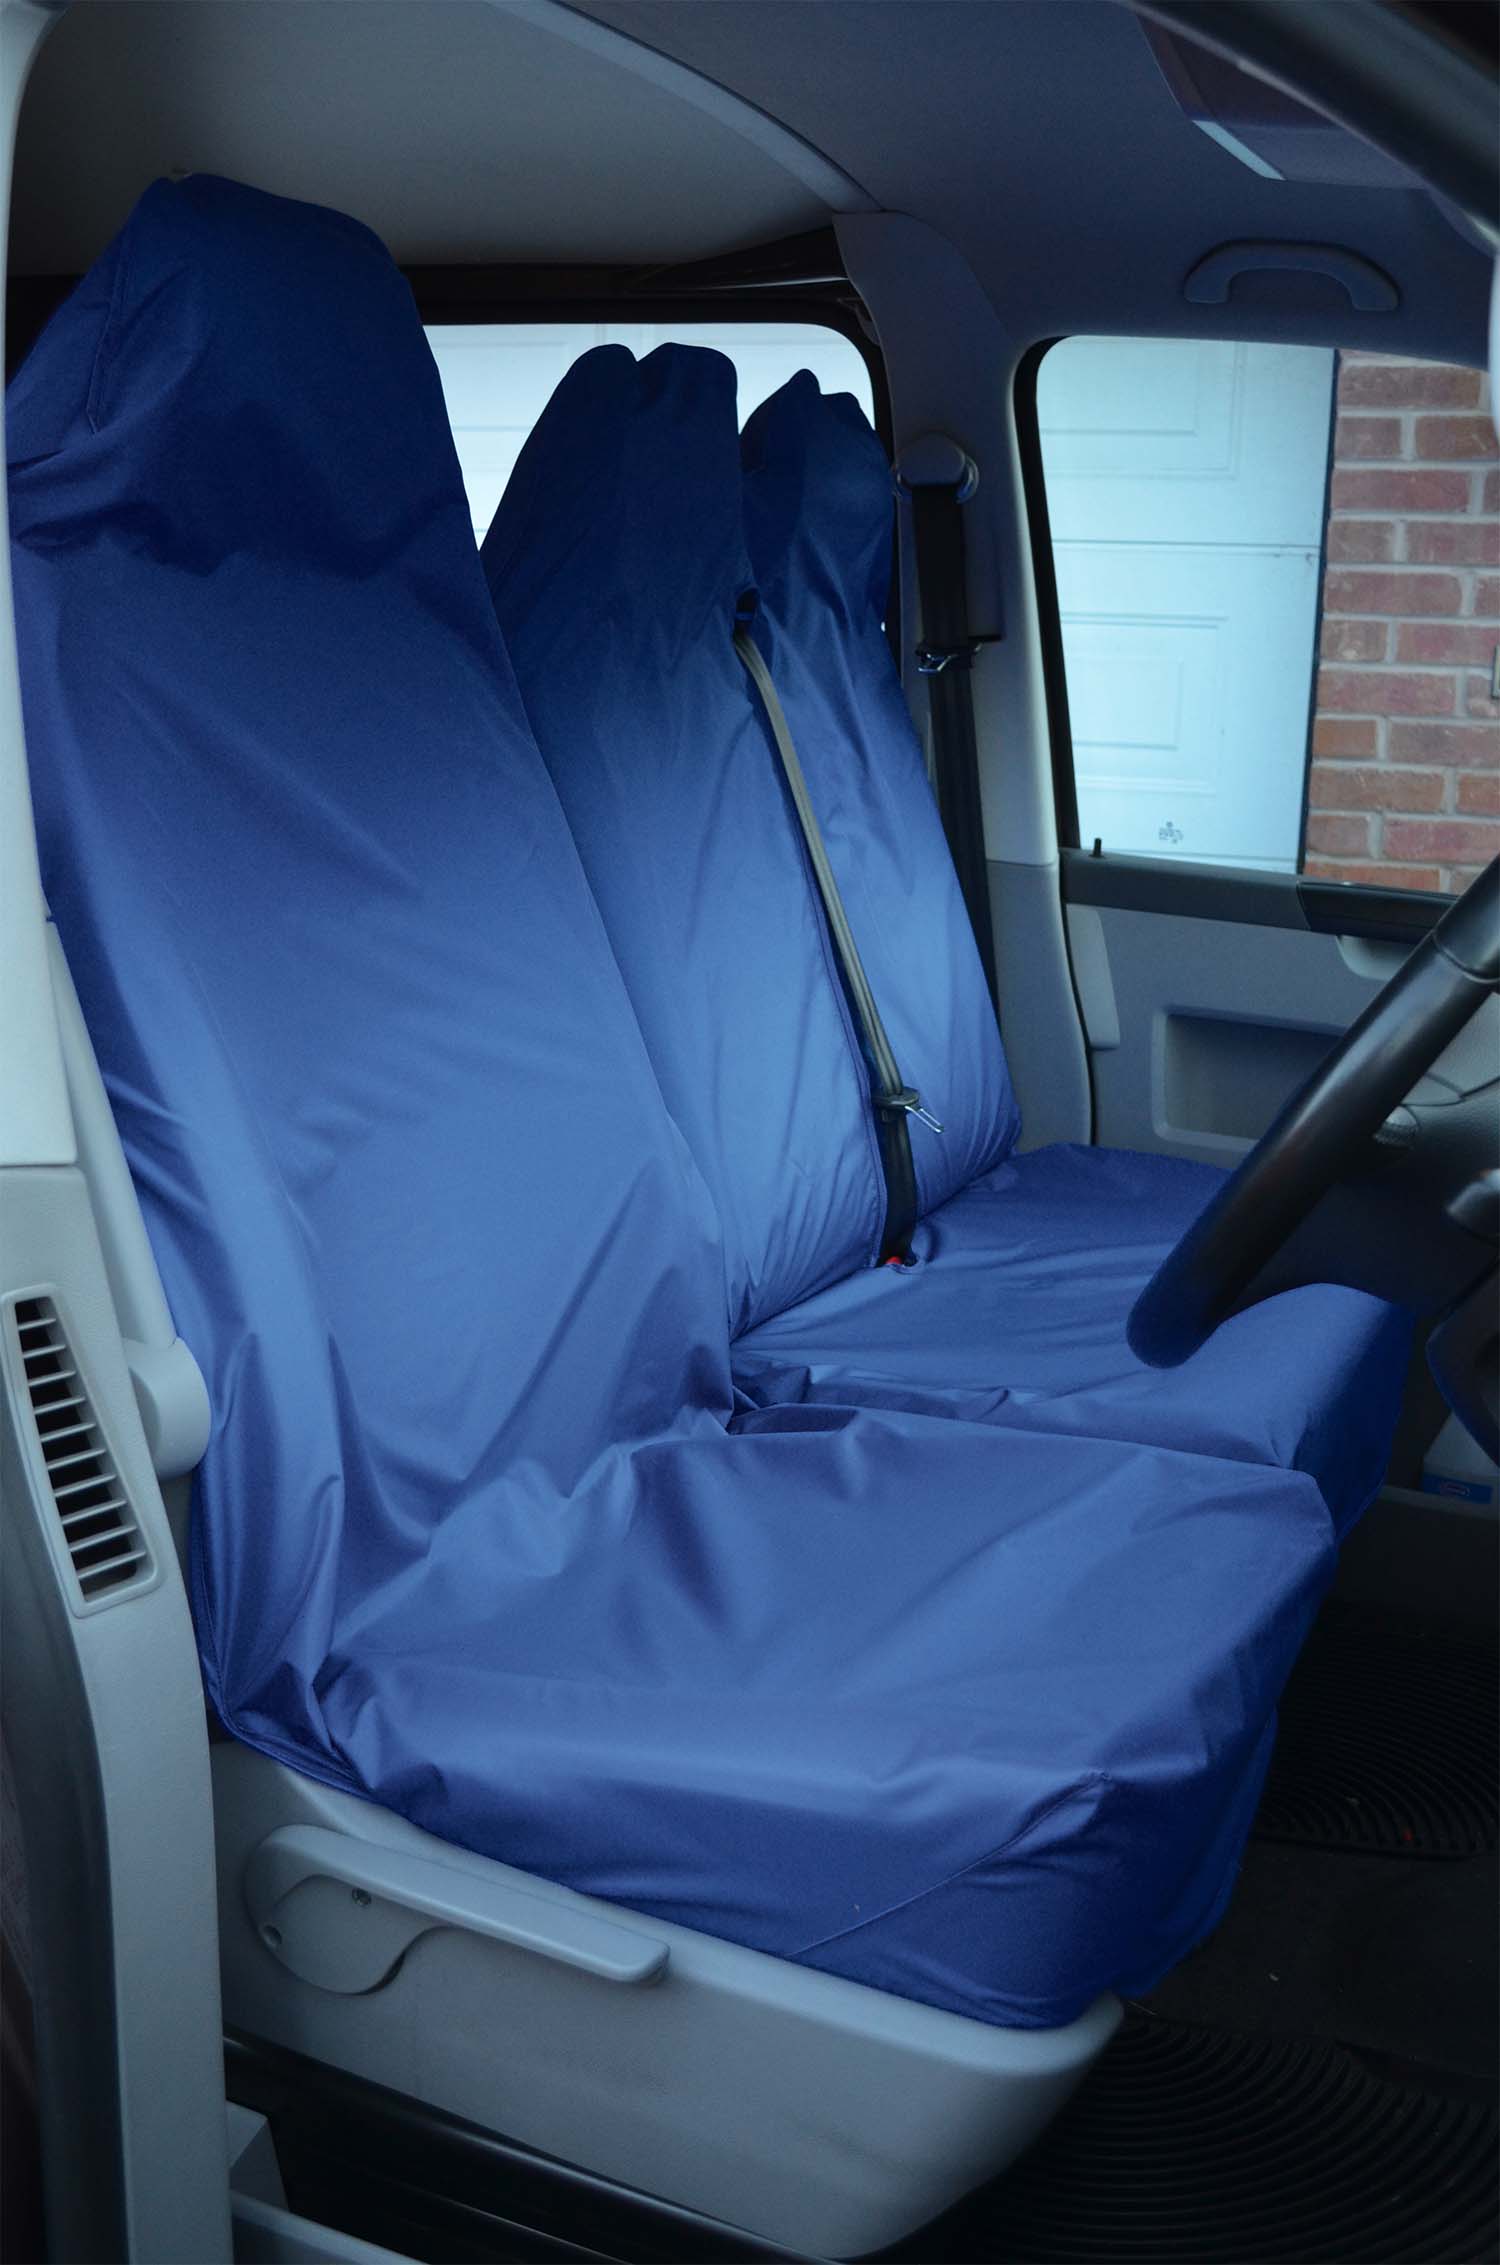 Universal Seat Covers (Single and Double) for Medium Vans